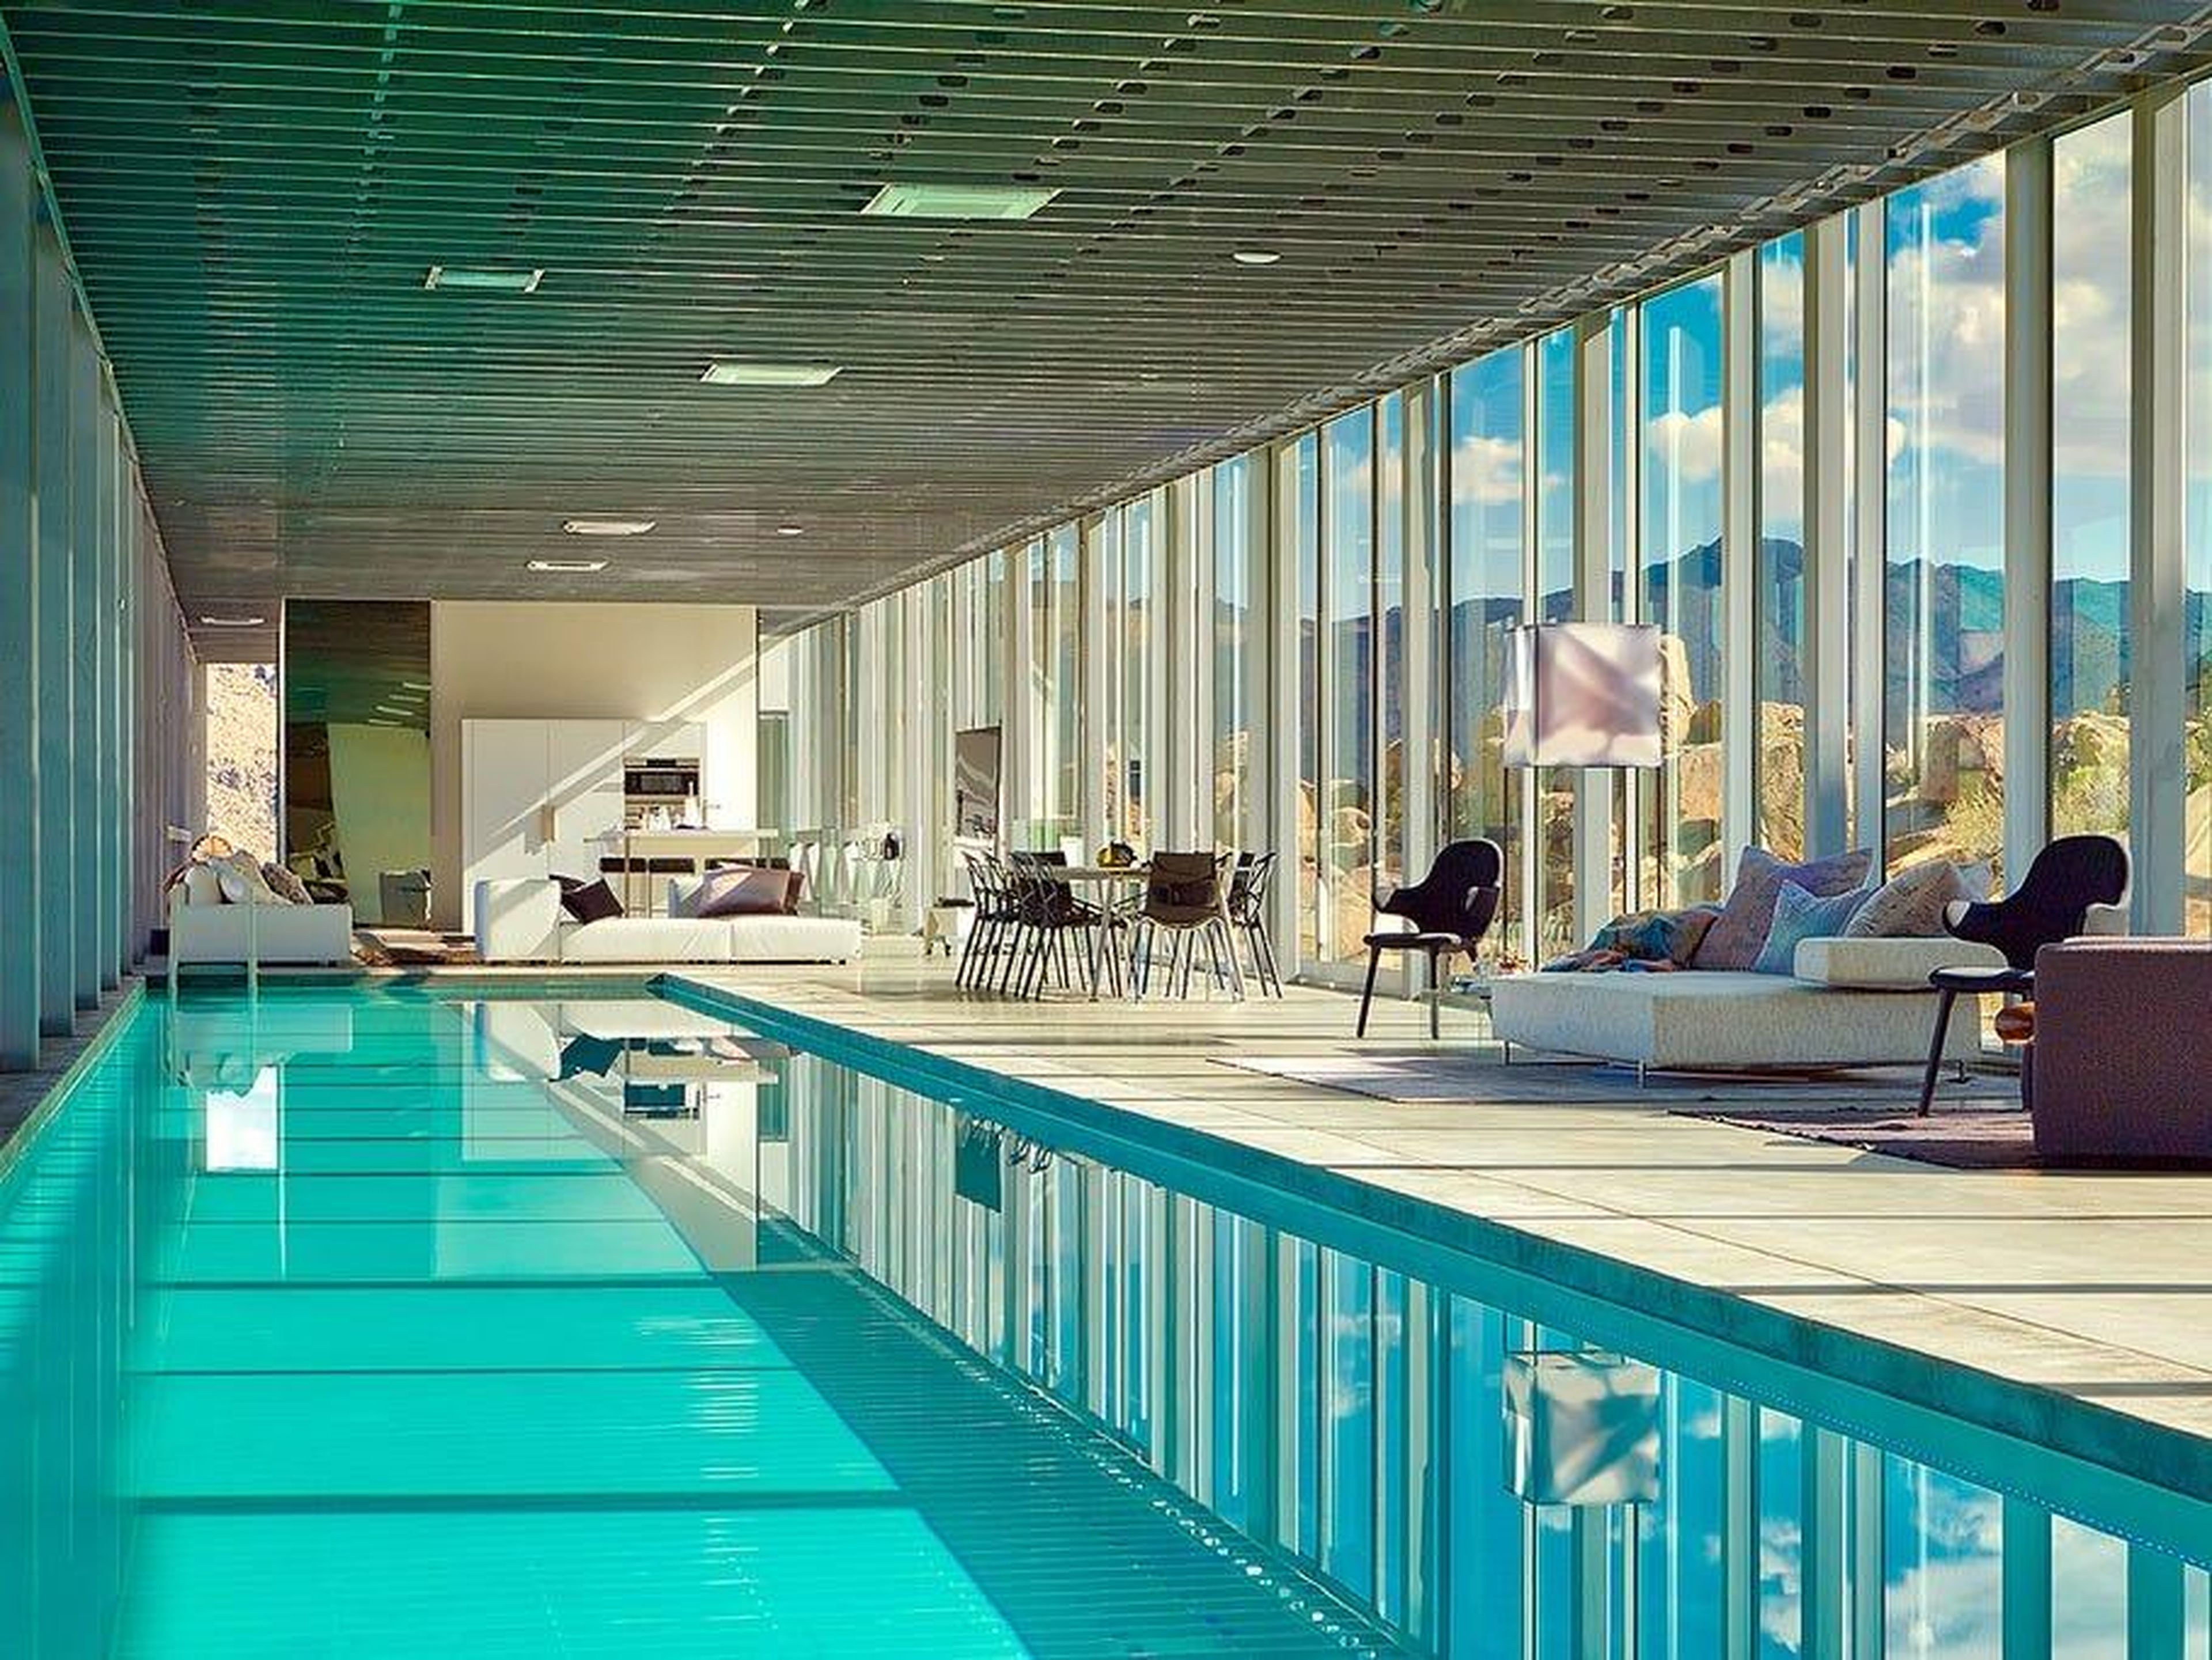 The central living space includes a 100-foot-long pool and mix of seating areas.